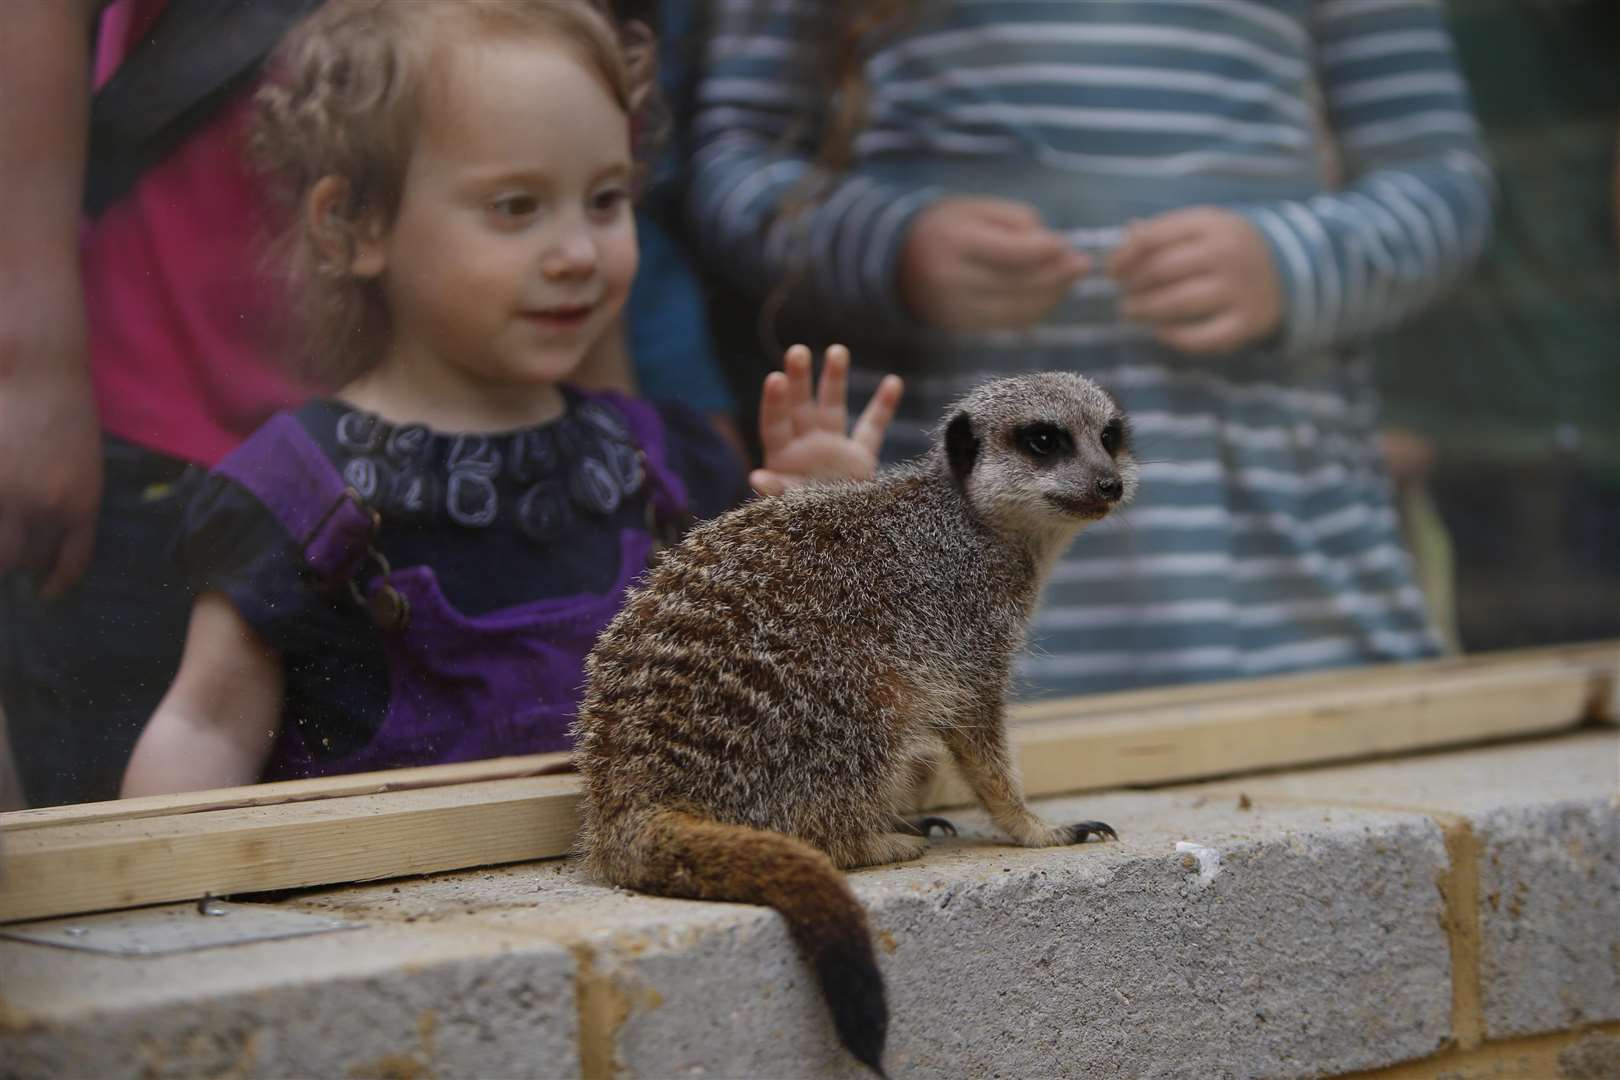 Catch the meerkats at Kent Life during your visit